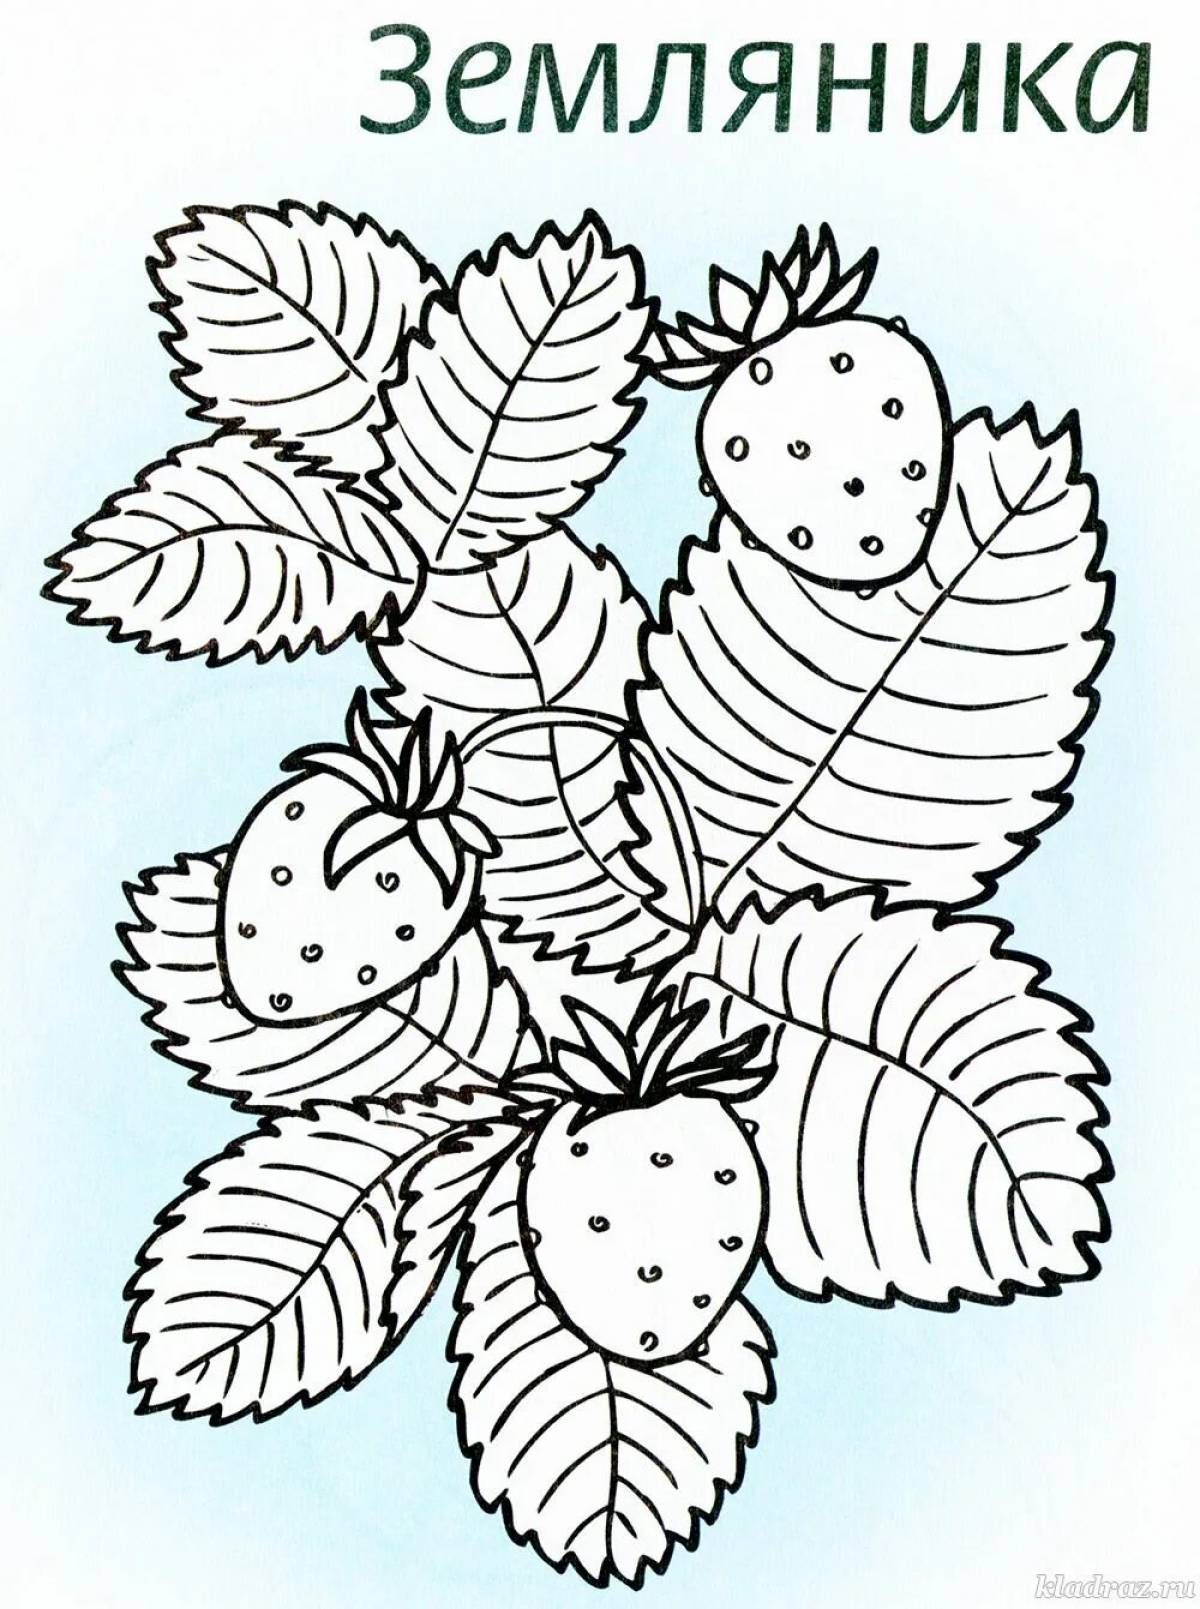 Original coloring pages with medicinal plants for preschoolers